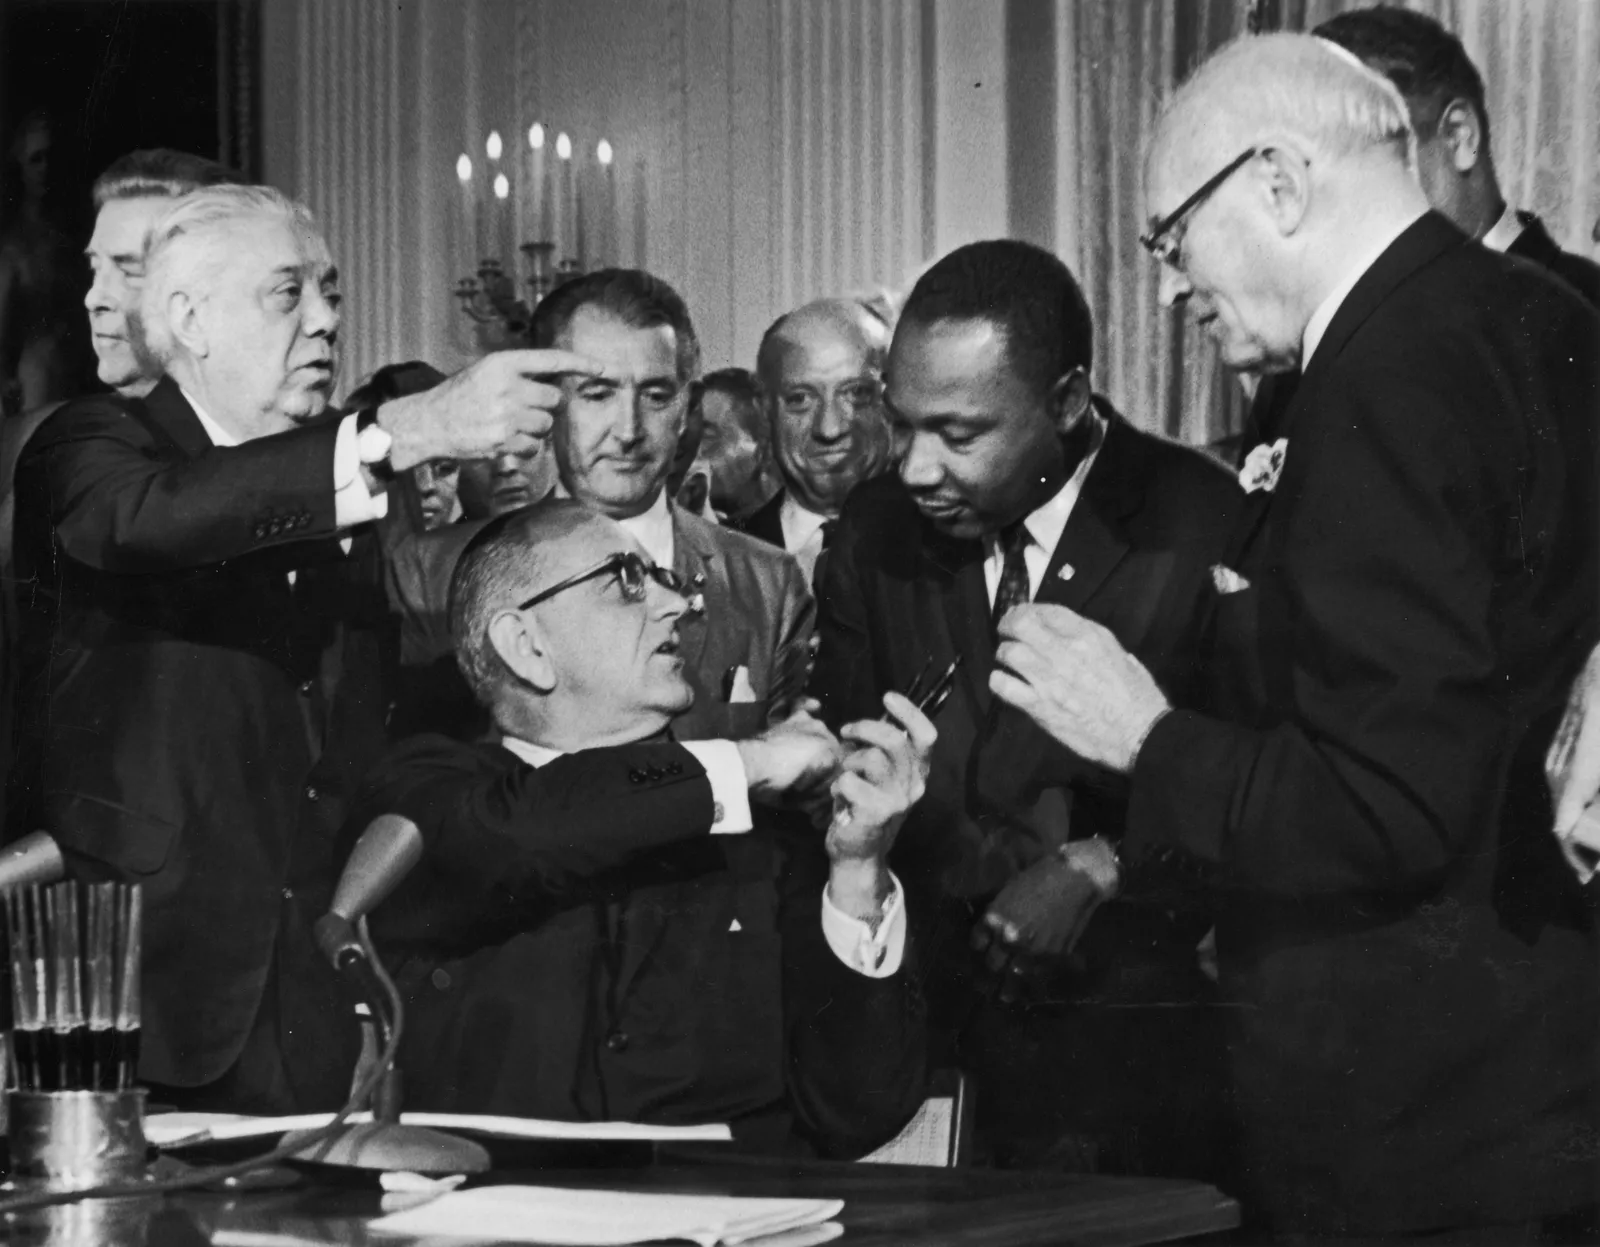 U.S. President Lyndon B. Johnson shakes the hand of Martin Luther King, Jr. at the signing of the Civil Rights Act while officials look on in Washington, D.C.